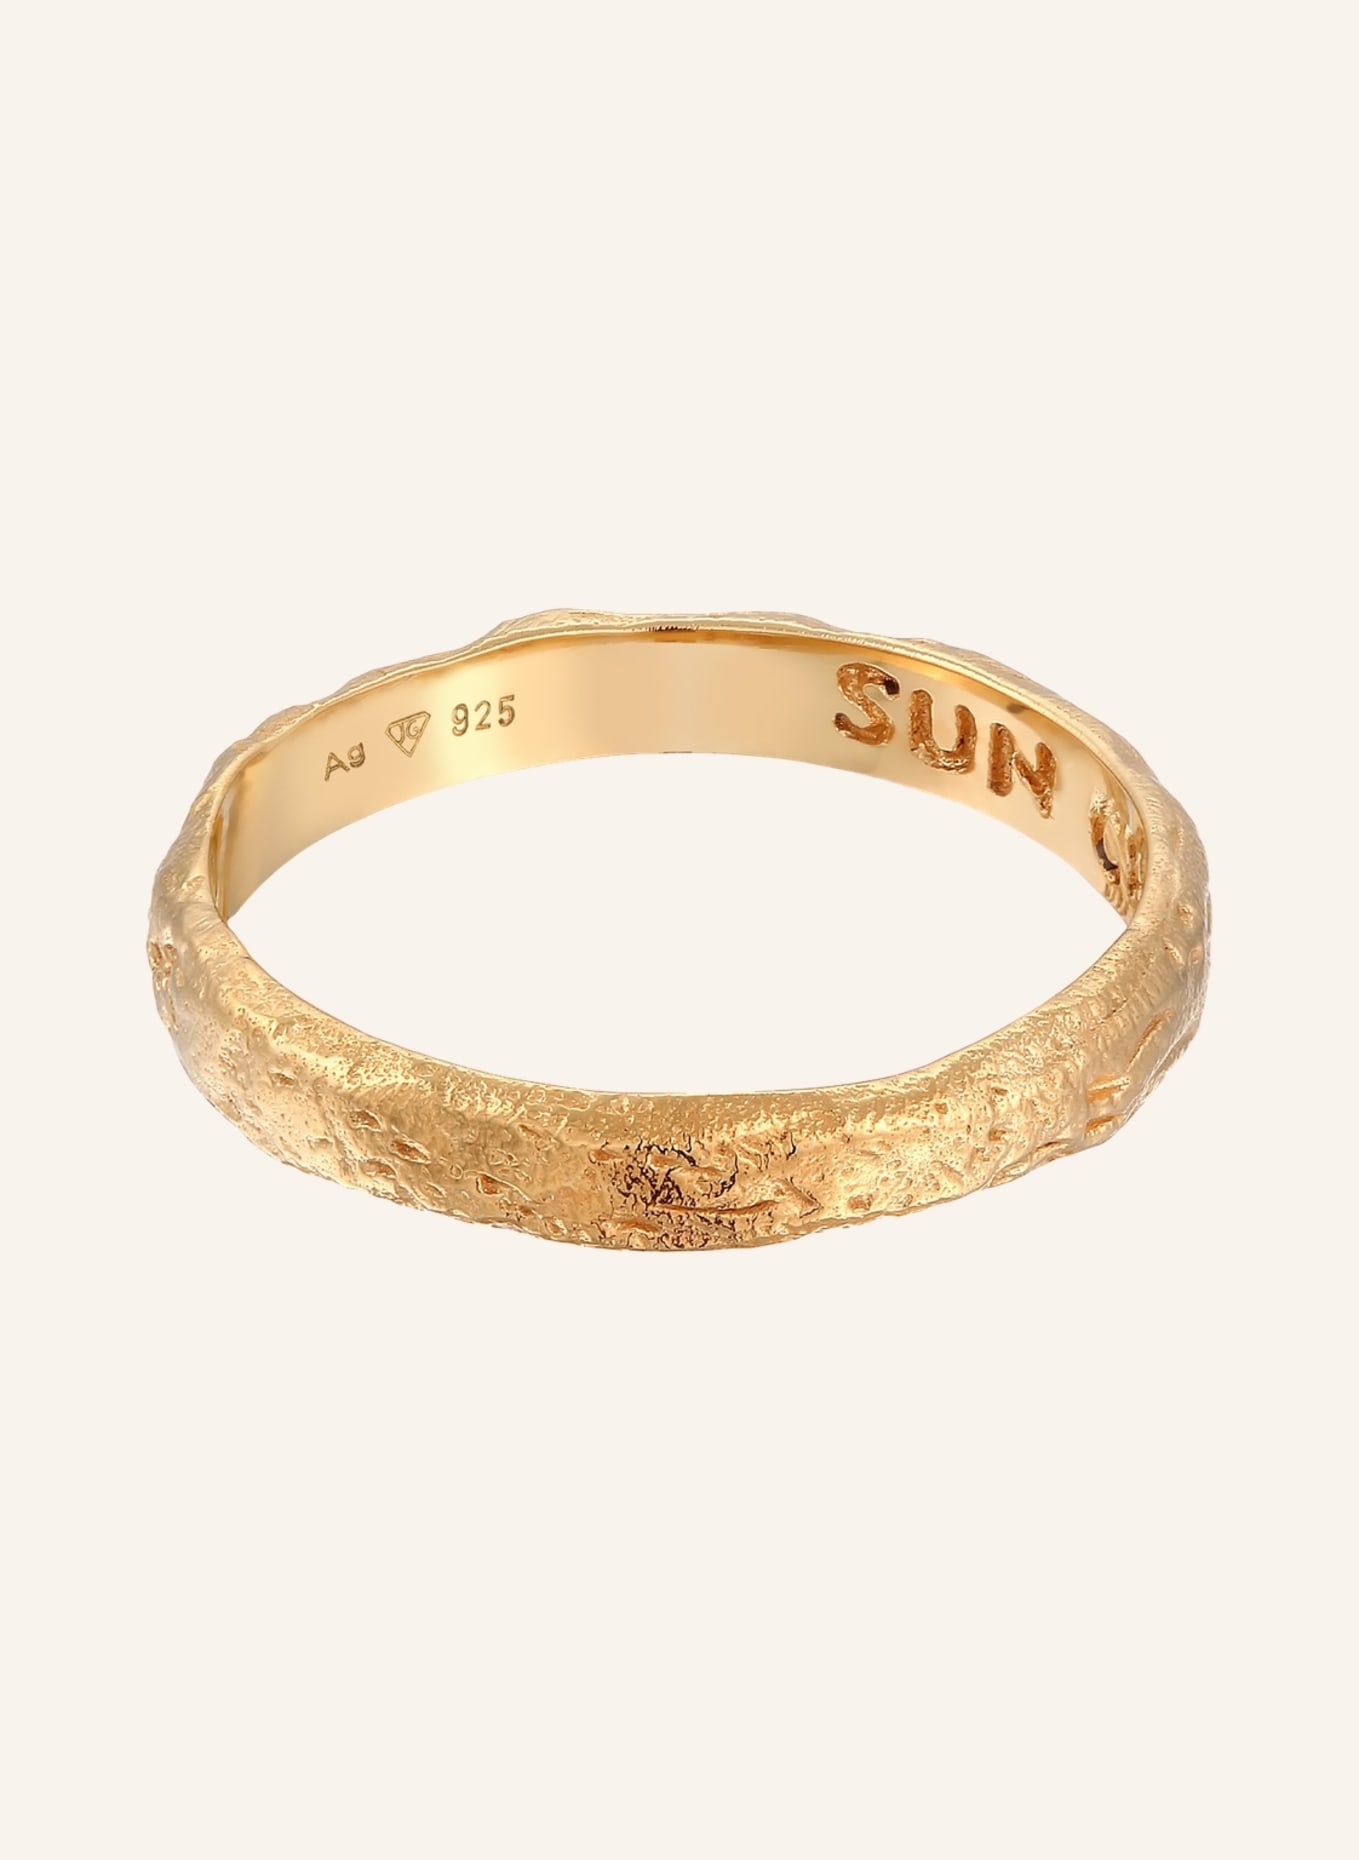 HAZE & in gold GLORY Ring